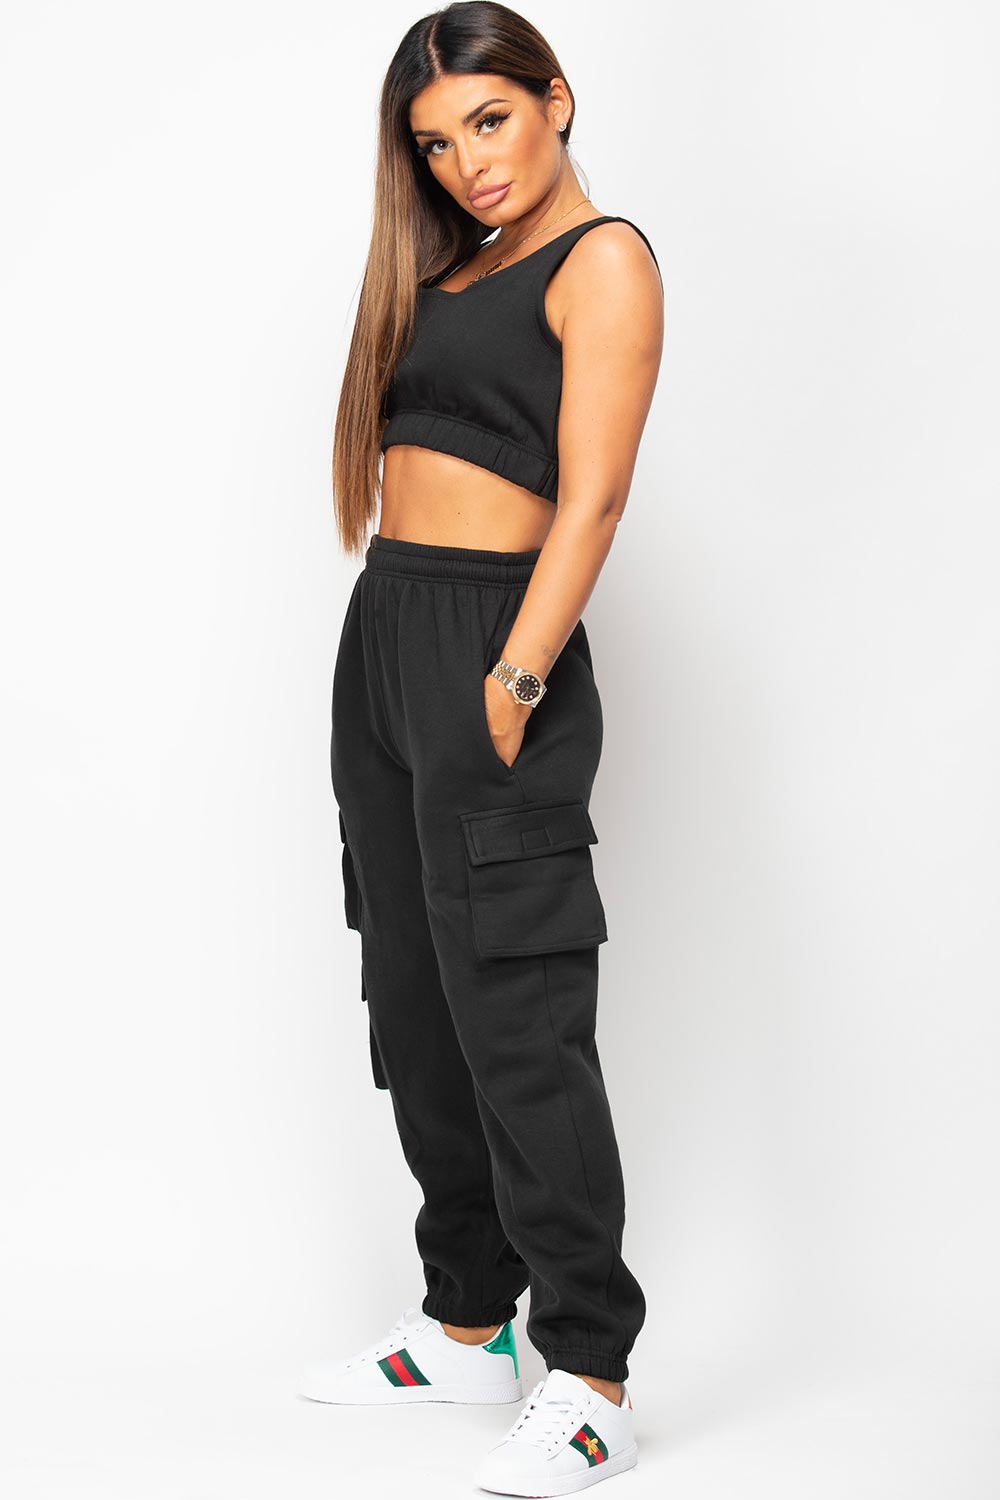 black joggers and top set womens 